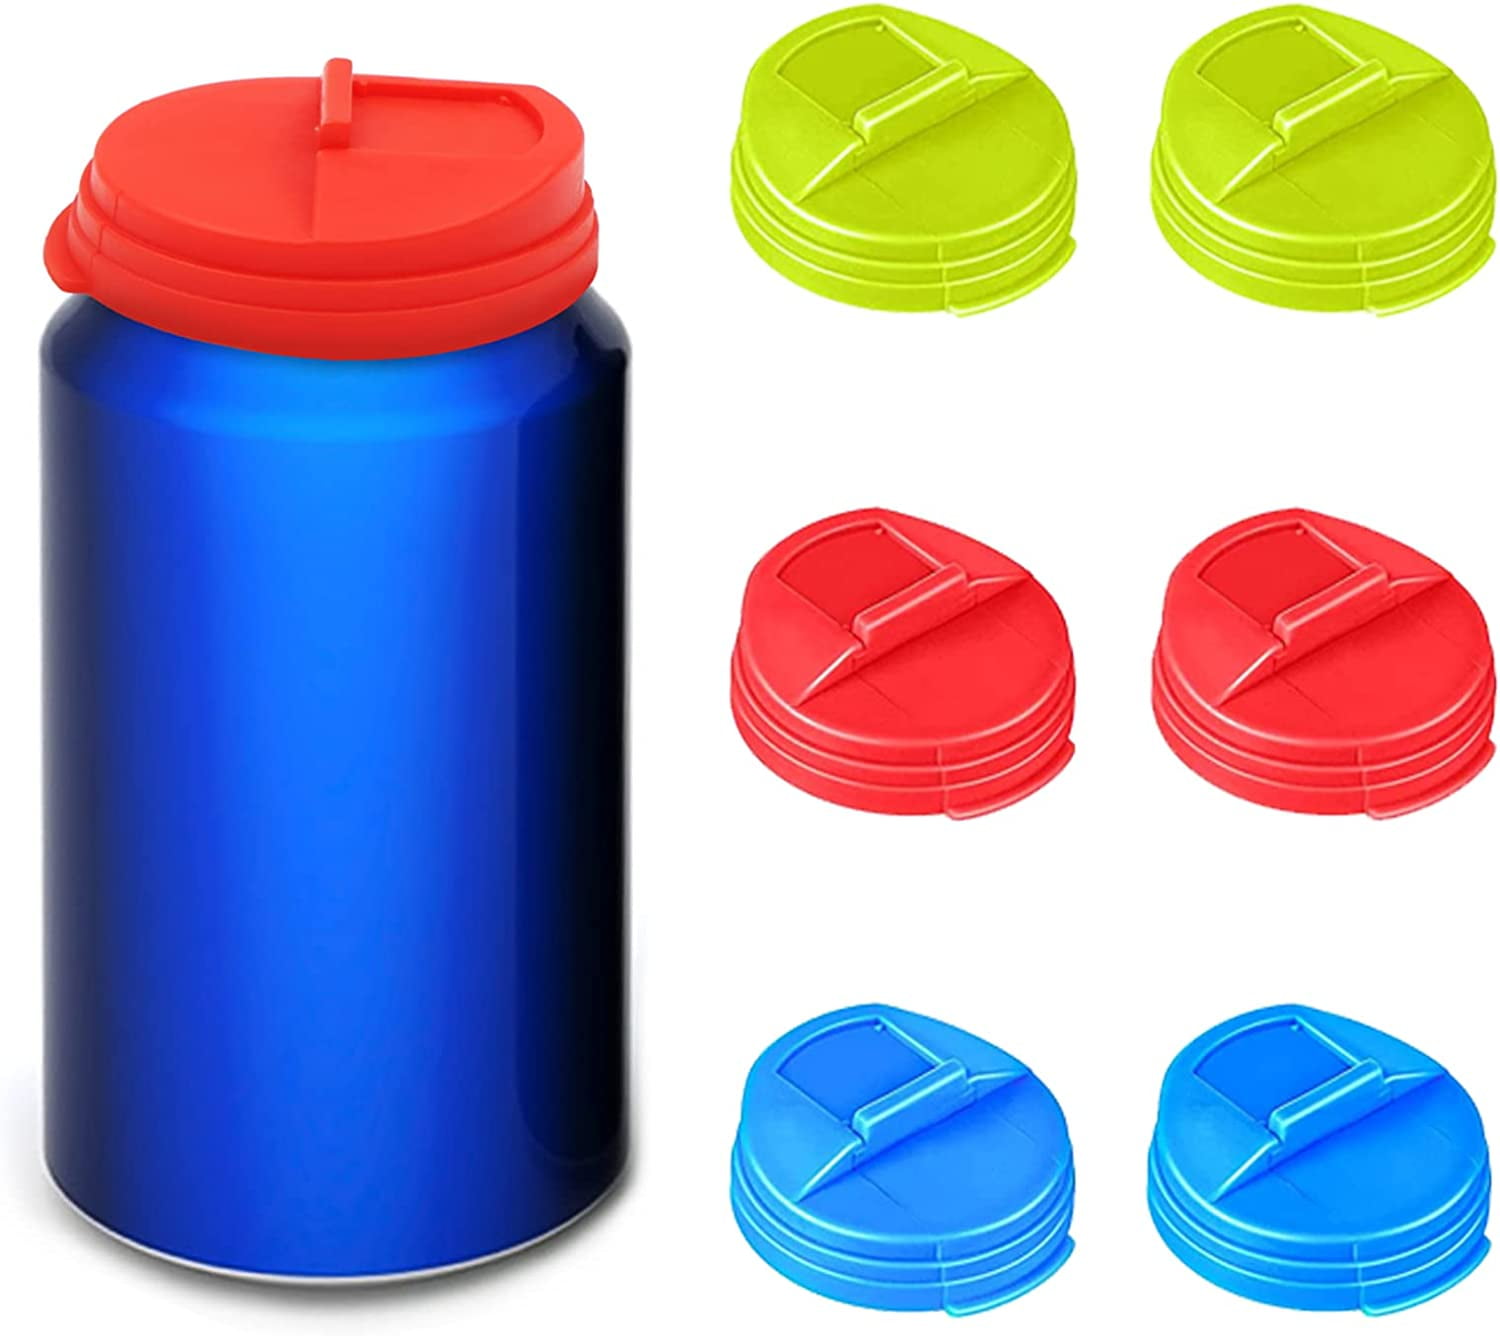 6 Pcs Can Covers for Drinks Cans, FineGood Reusable Soda Can Lids Anti-Dust Silicone Can Caps Can Bottle Top Lids for Beer Juice Energy Drinks, Size